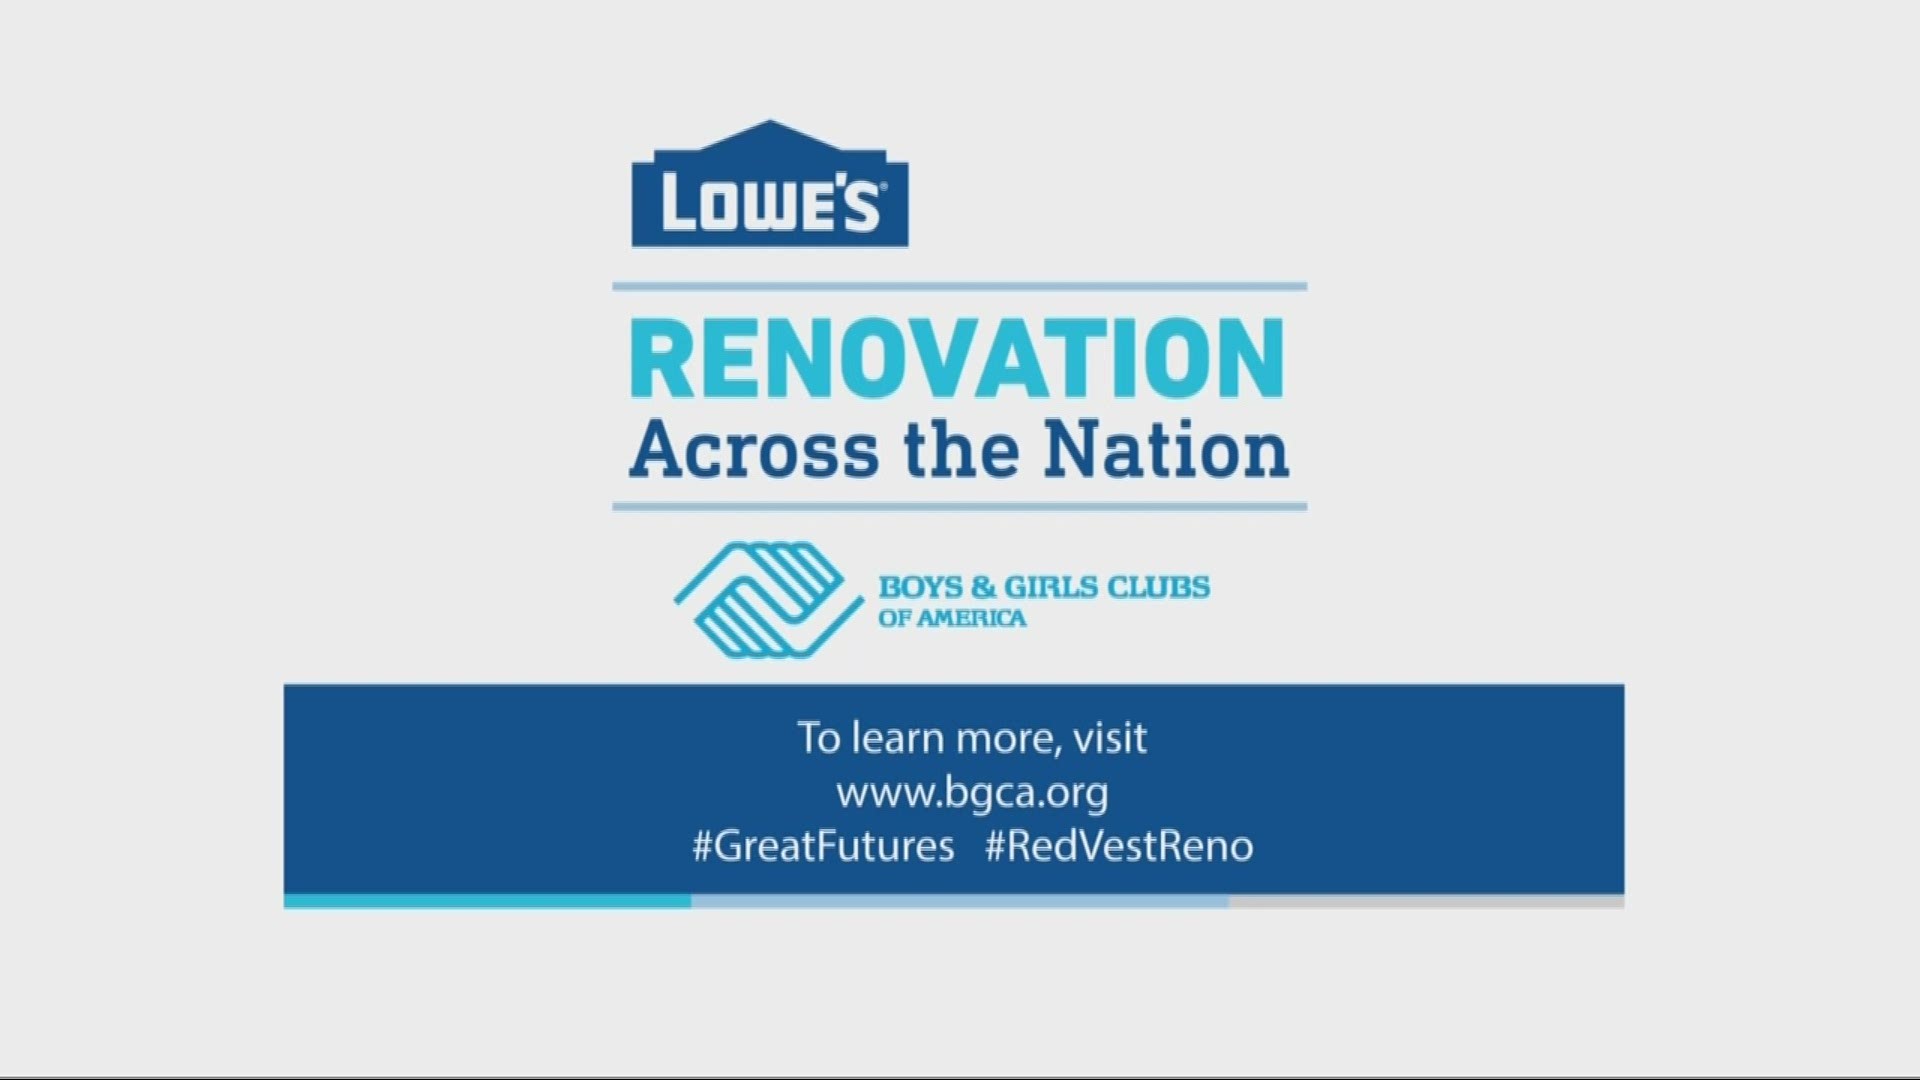 See how Lowe?s is helping spruce up clubs across America